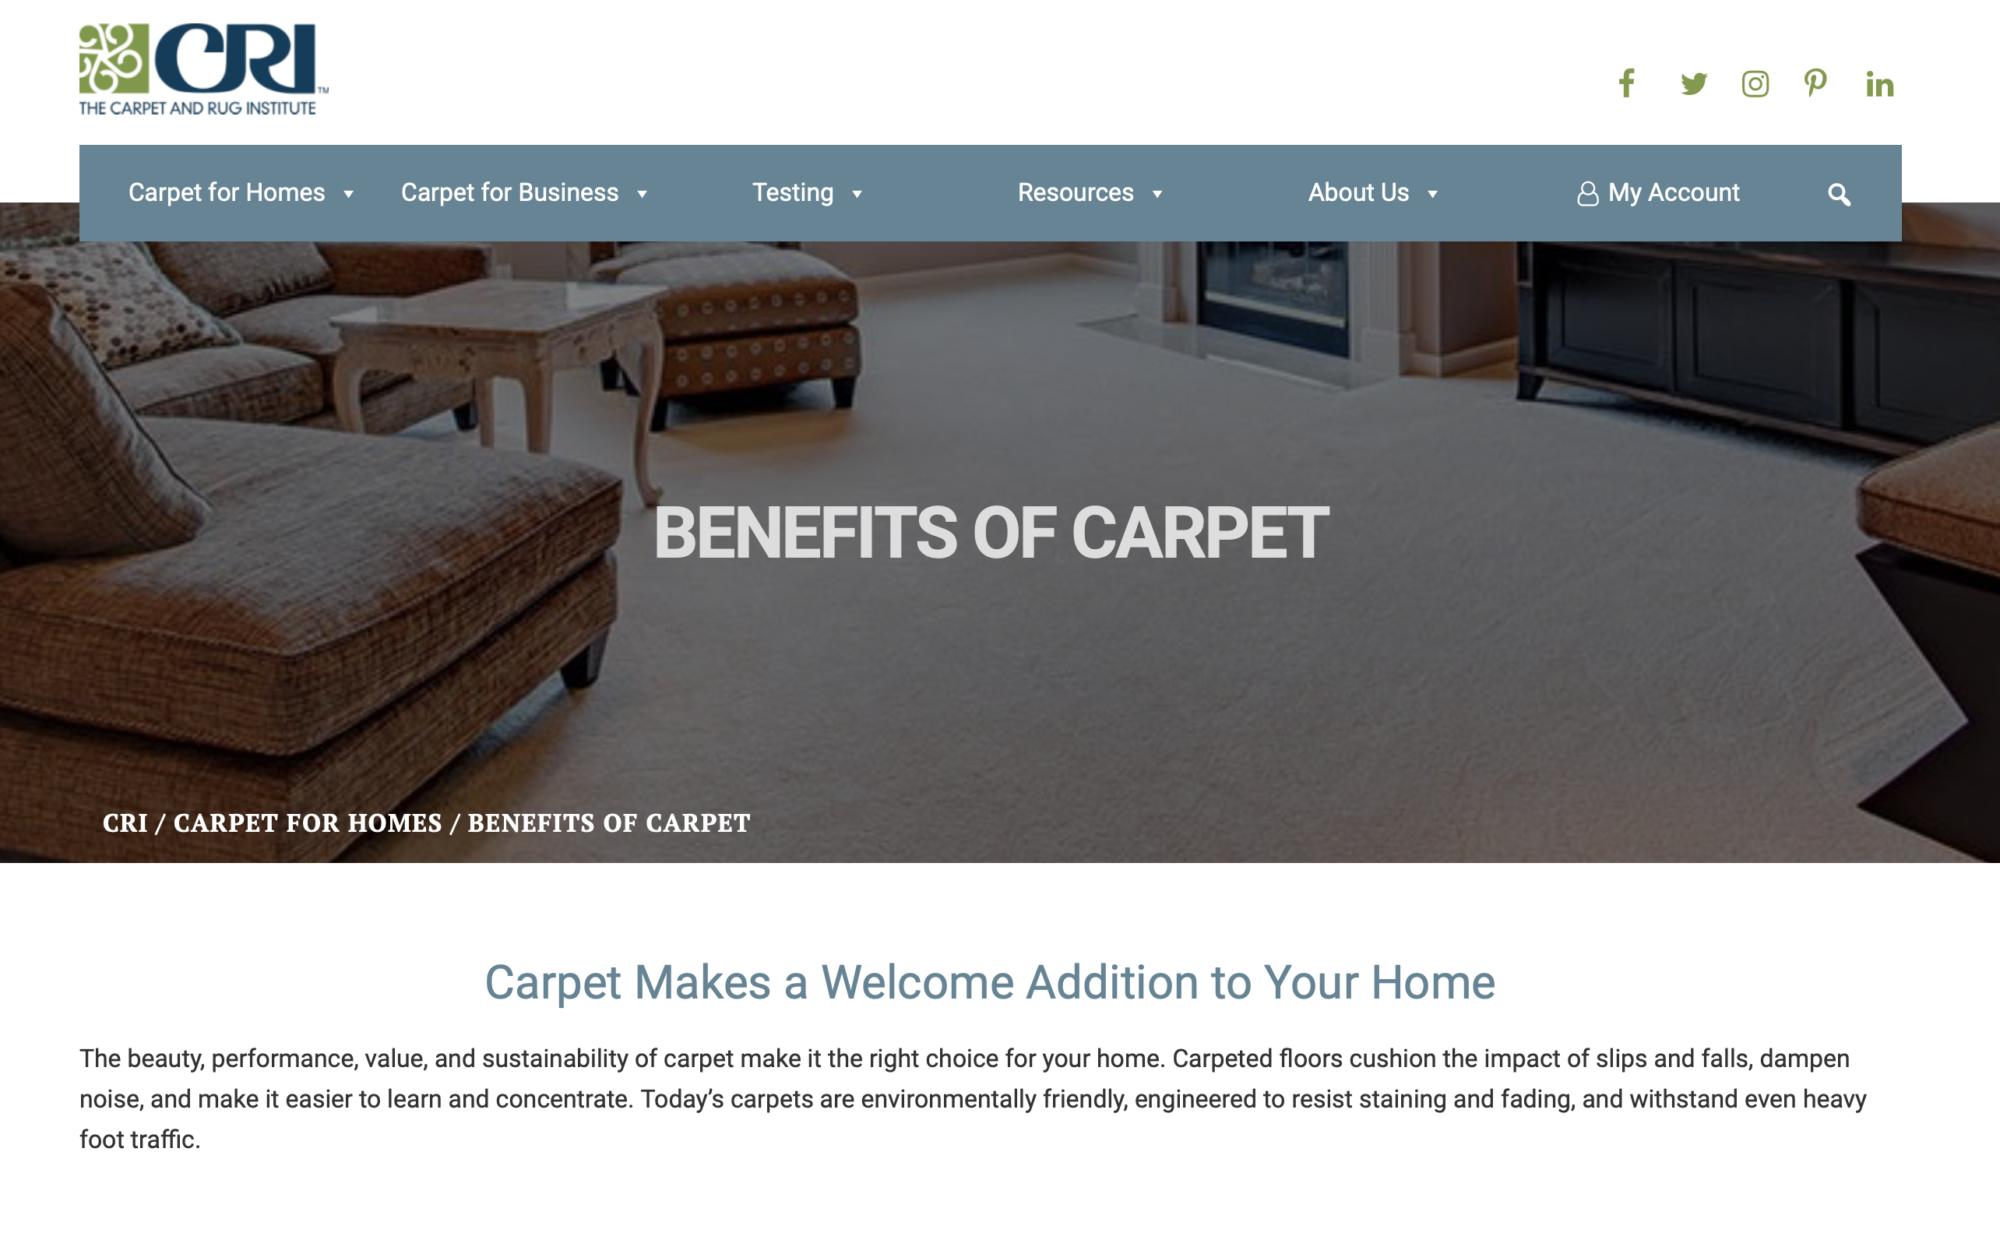 Carpet Installation Information - The Carpet and Rug Institute